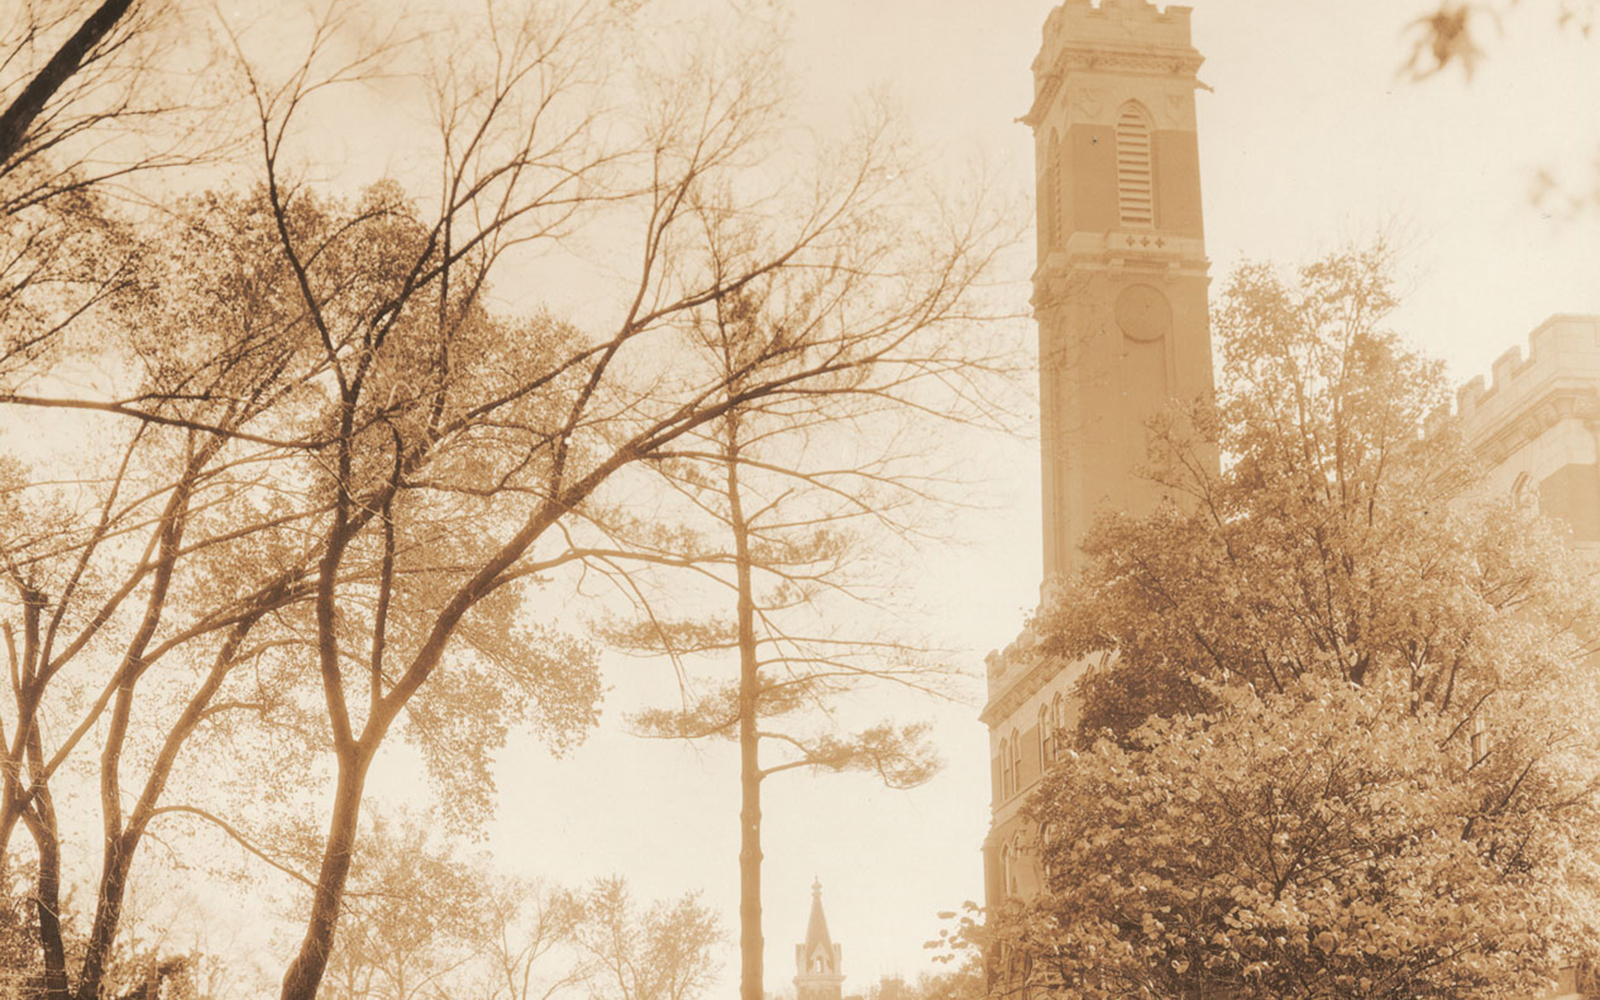 Sepia-tone image of Kirkland Hall from the early 1900s